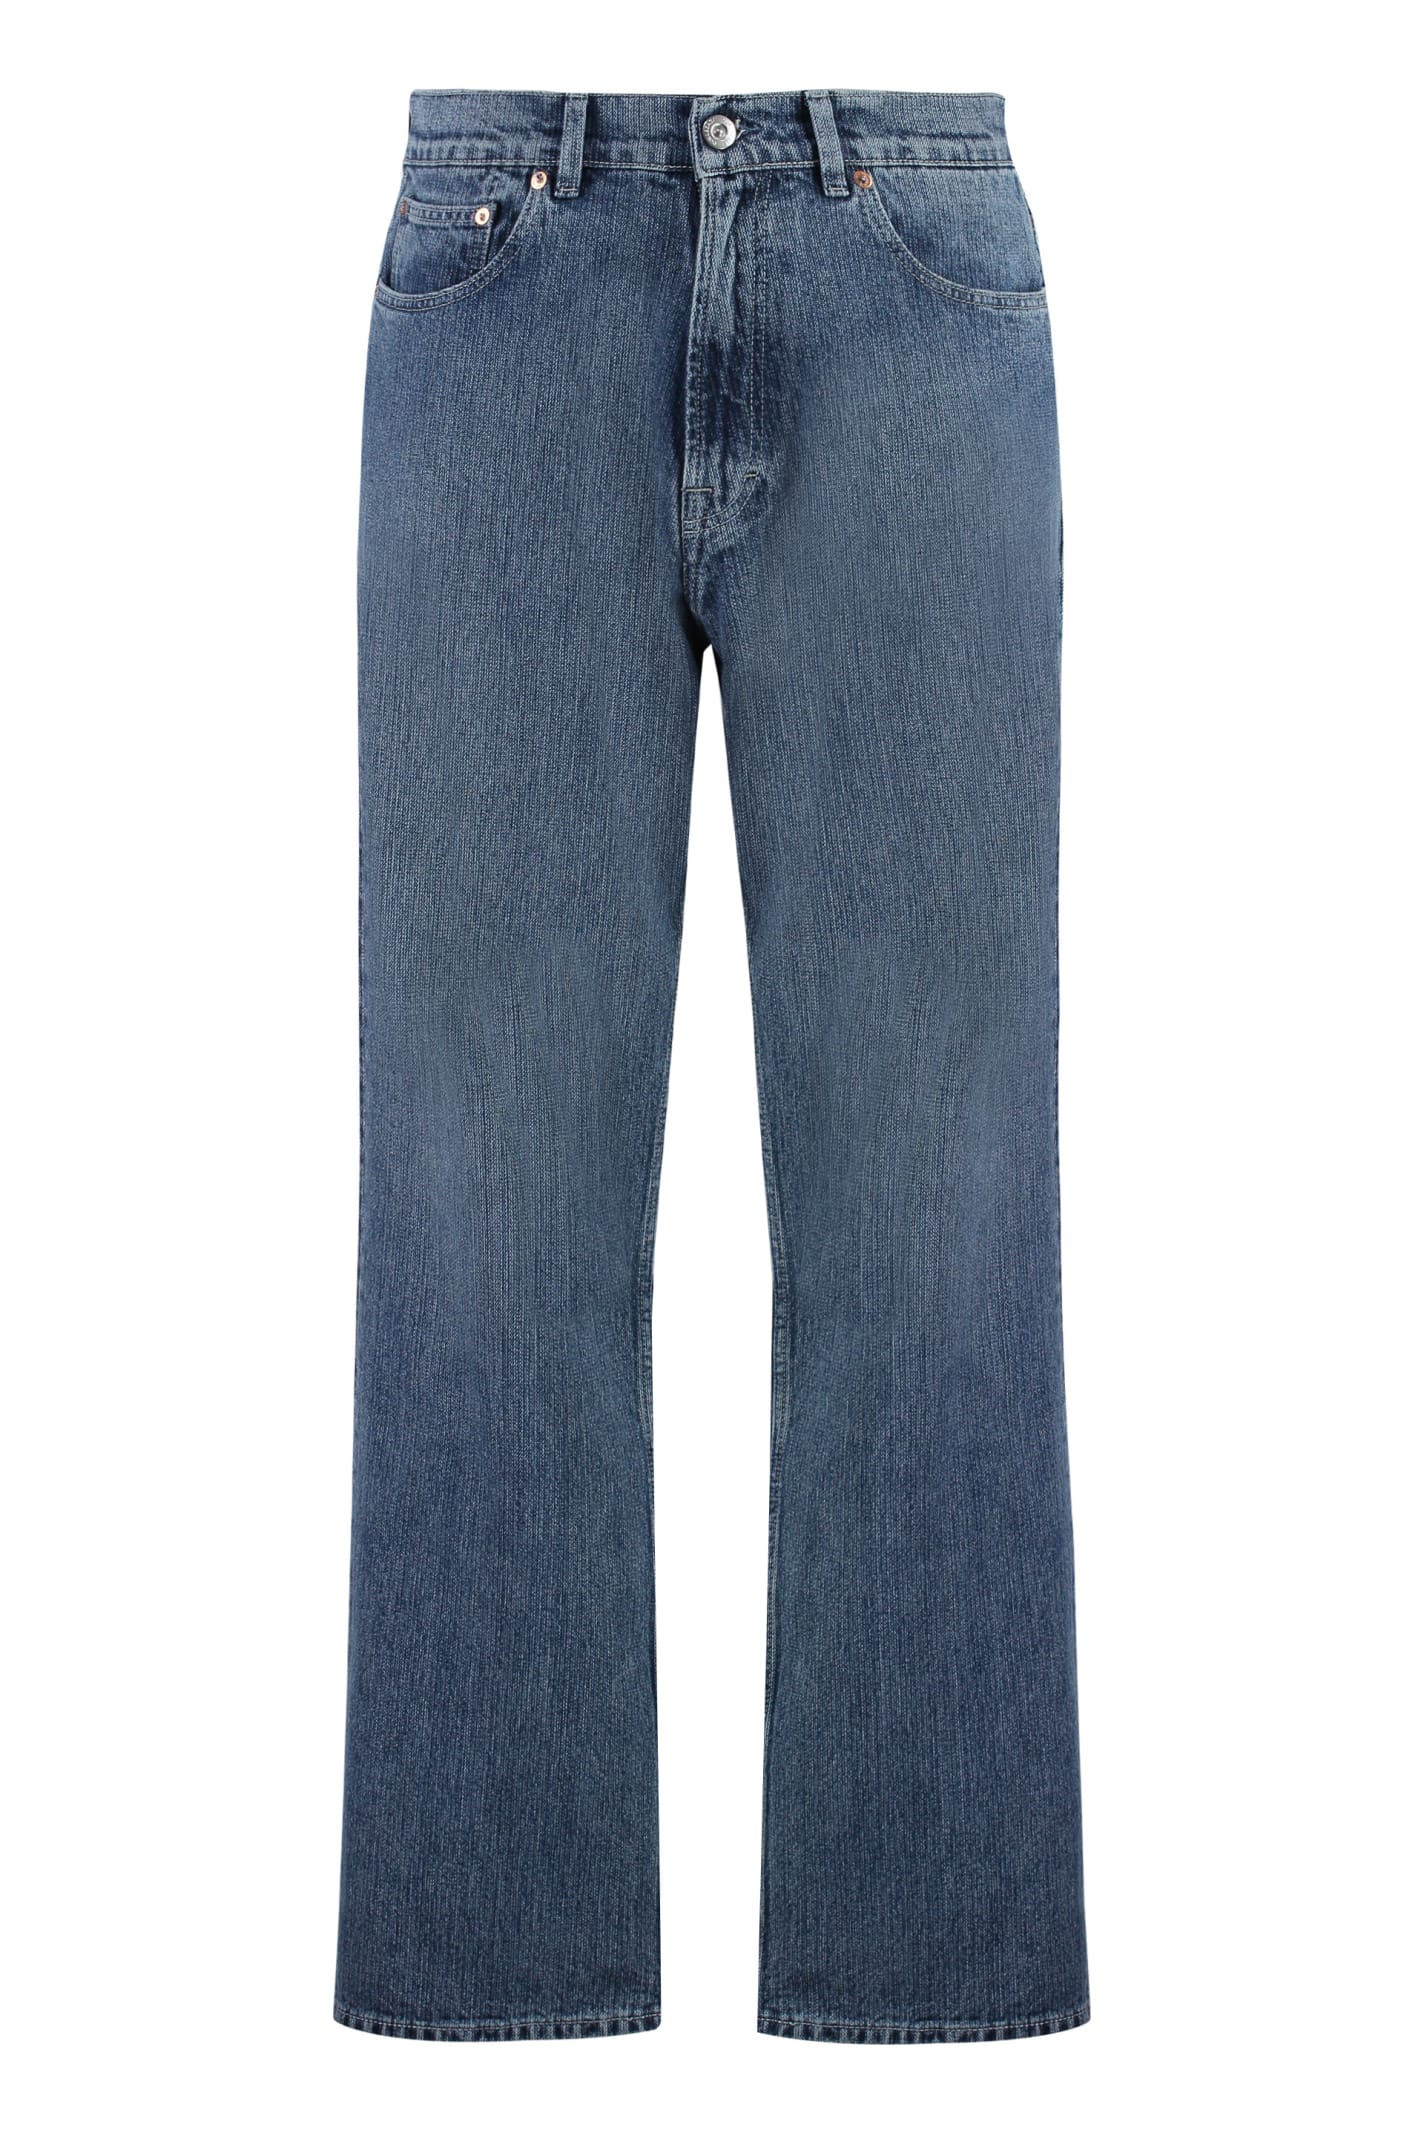 OUR LEGACY 5-POCKET STRAIGHT-LEG JEANS